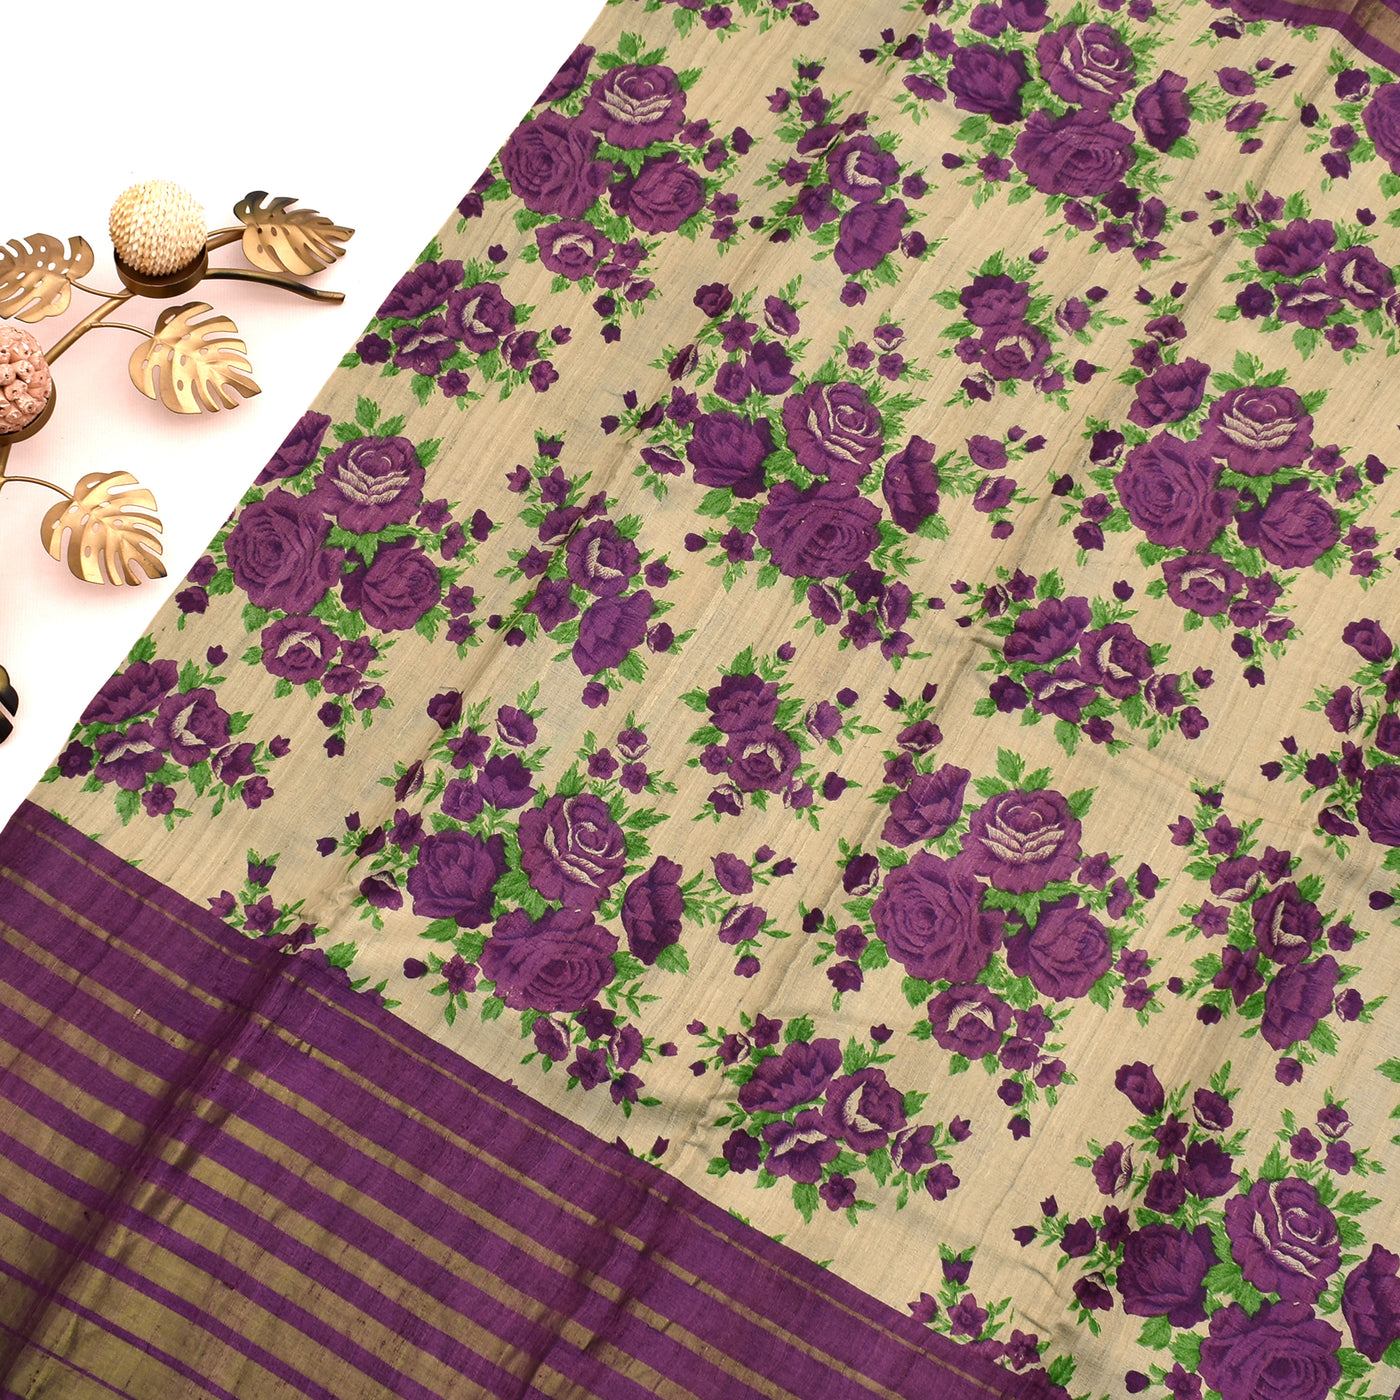 Off White Tussar Silk Saree with Floral Print Design